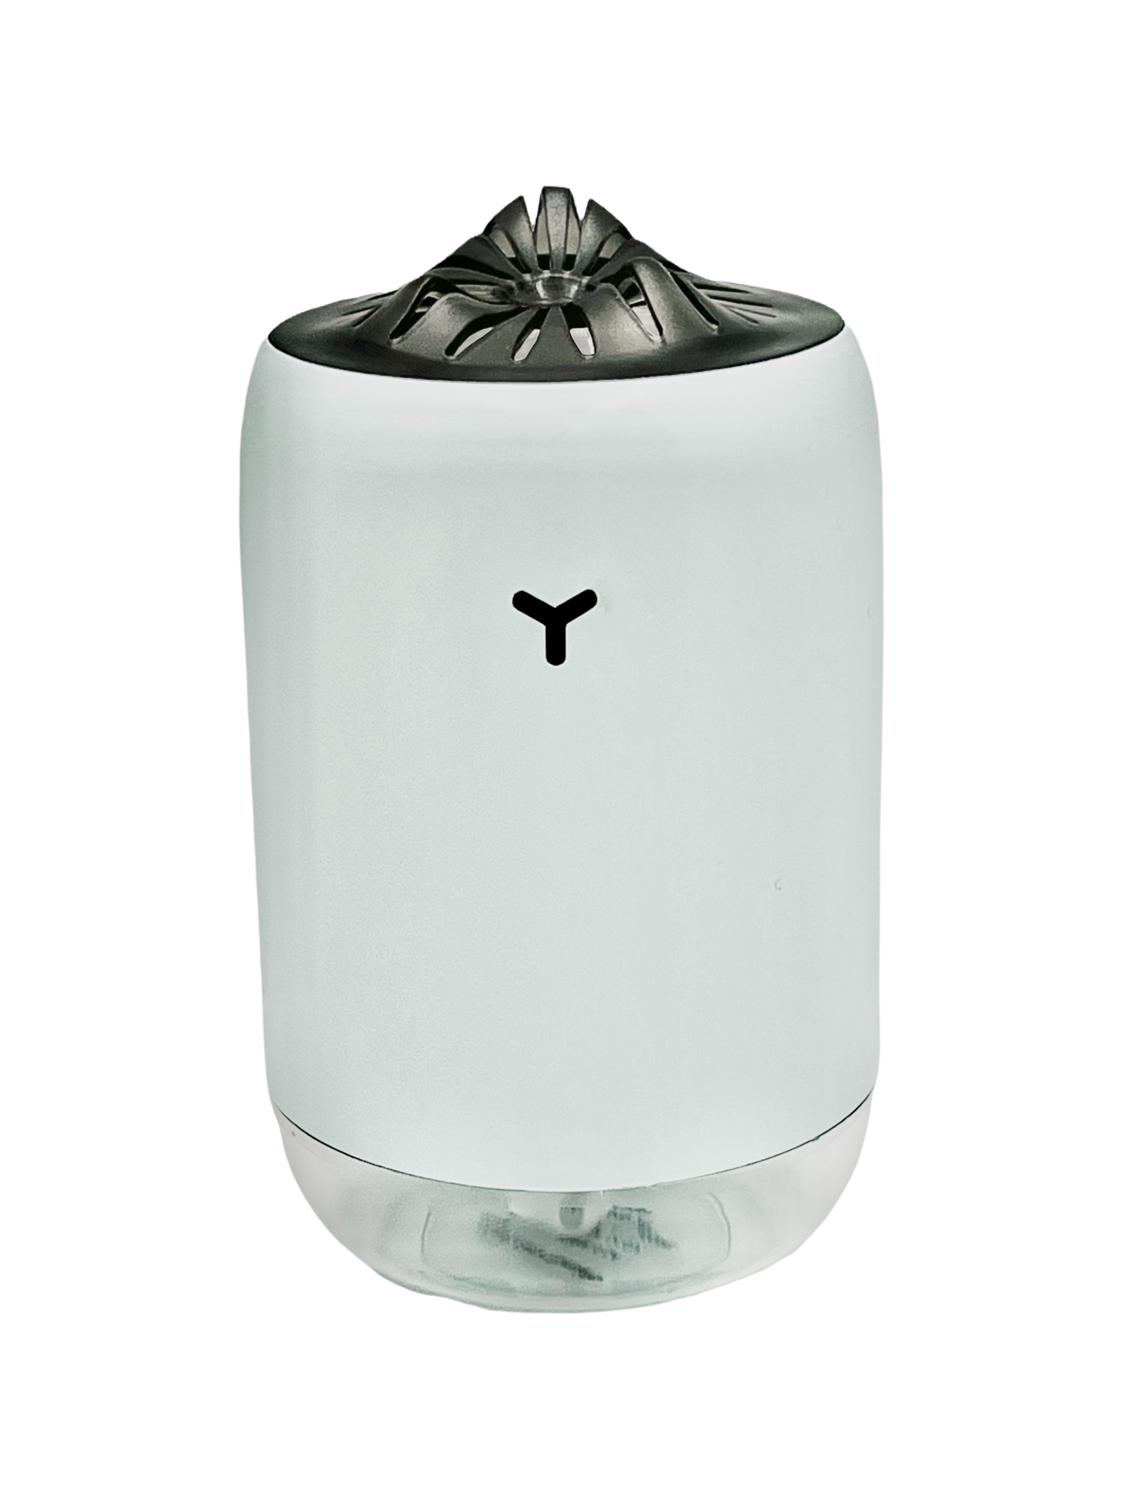 Humidifier with mood light - White (260ml) + 1 FREE 10ml Diffusion Blend